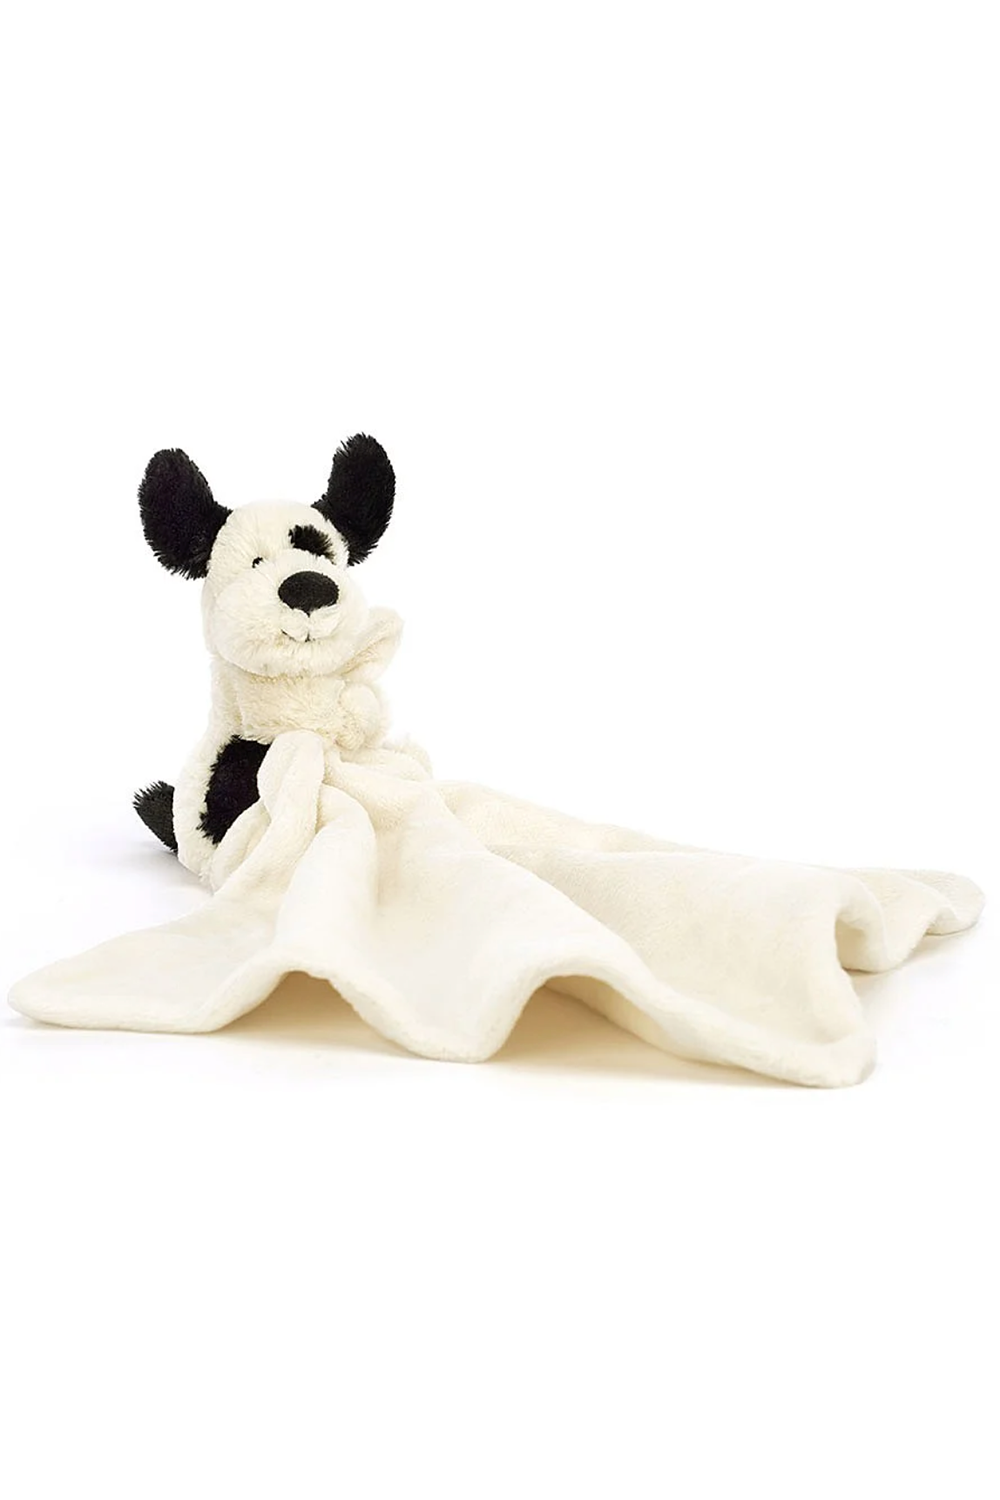 JELLYCAT Bashful Soother - Black & Cream Puppy